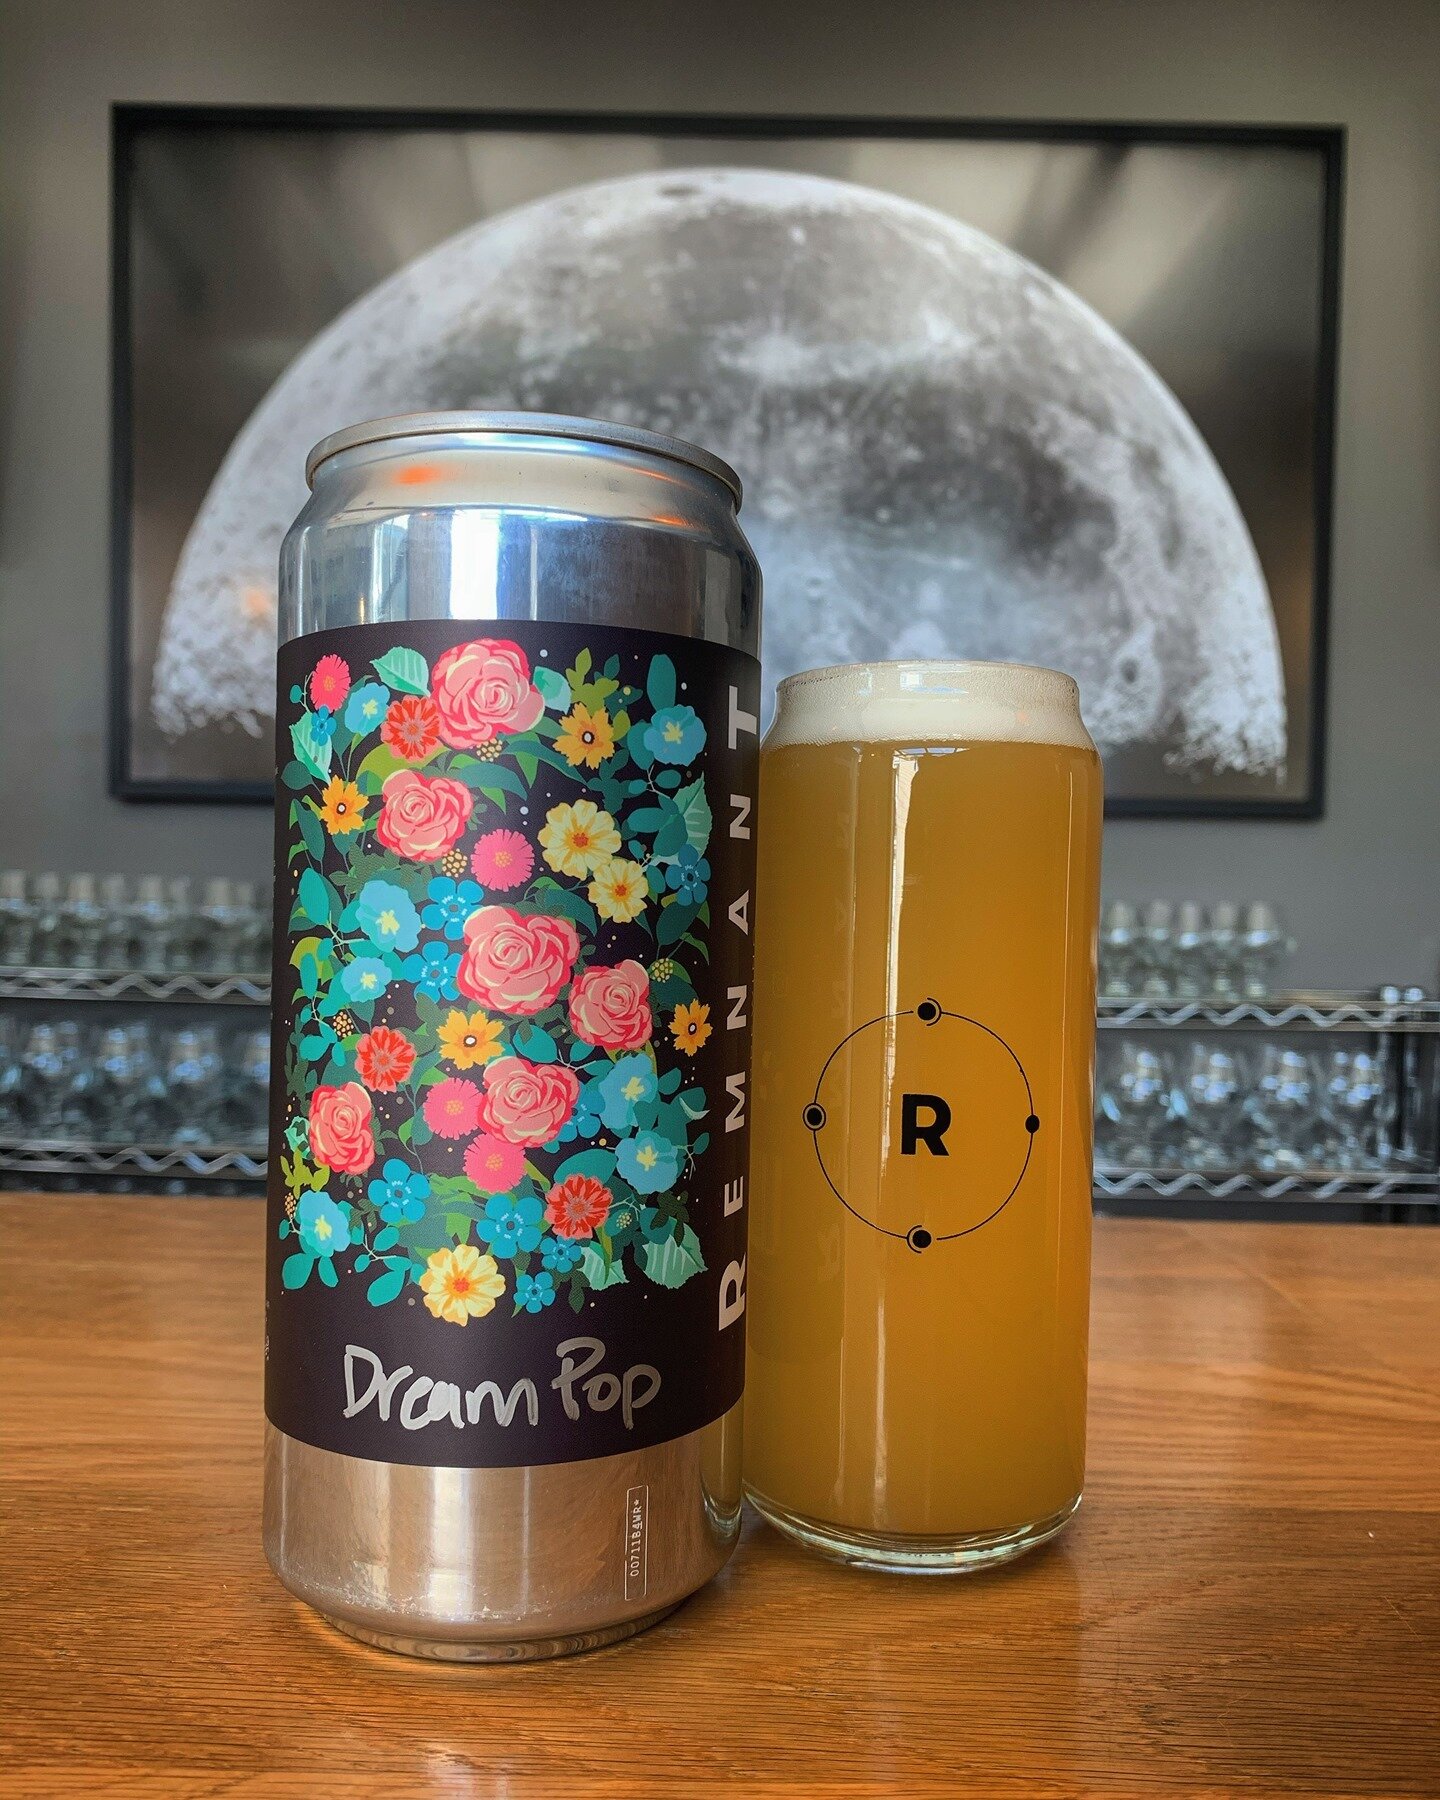 To honor Women's Month, our friends @craneandturtle designed this beautiful label. 💐 Get a crowler to go, enjoy this artwork, and we'll donate $1 from each crowler sold to #theelliefund, supporting women who have been diagnosed with breast cancer th